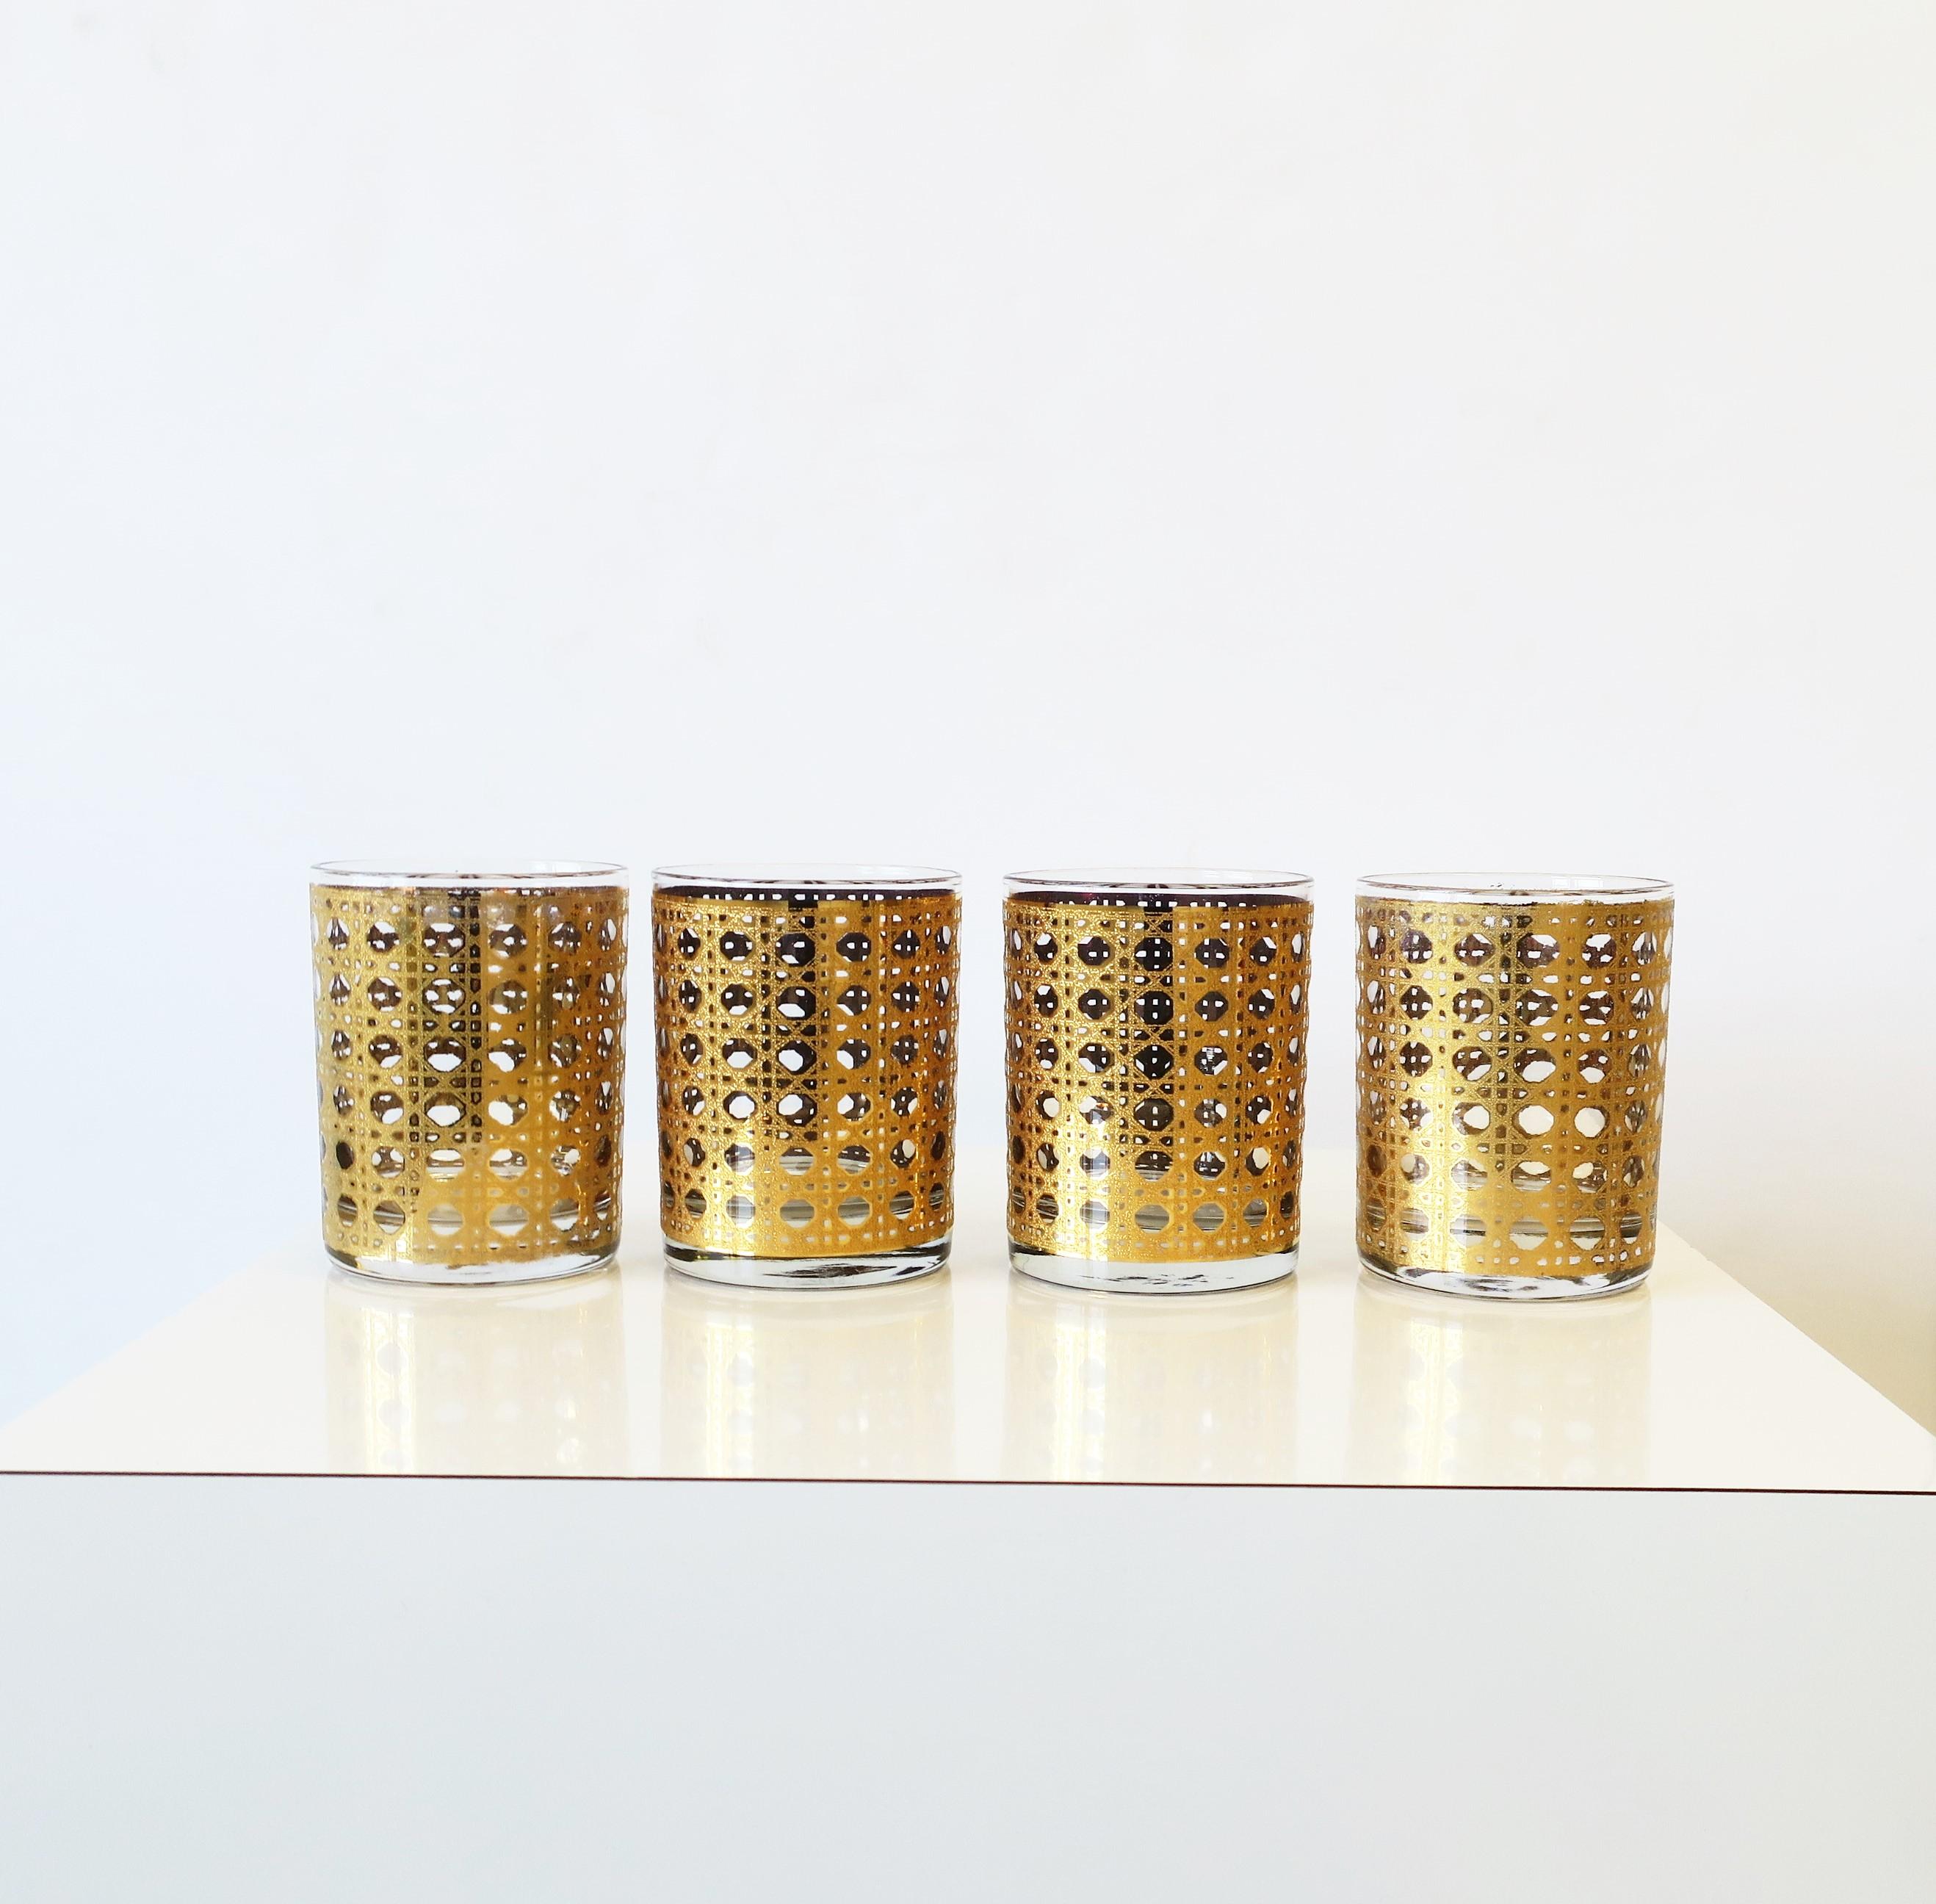 A rare vintage set of four (4) 22-karet gold wicker 'cane' pattern rocks' cocktail glasses, circa 1960s mid-20th century, USA. Glasses have a raised wicker 'cane' relief around exterior. A great addition to any bar, bar cart, cabinet, entertaining